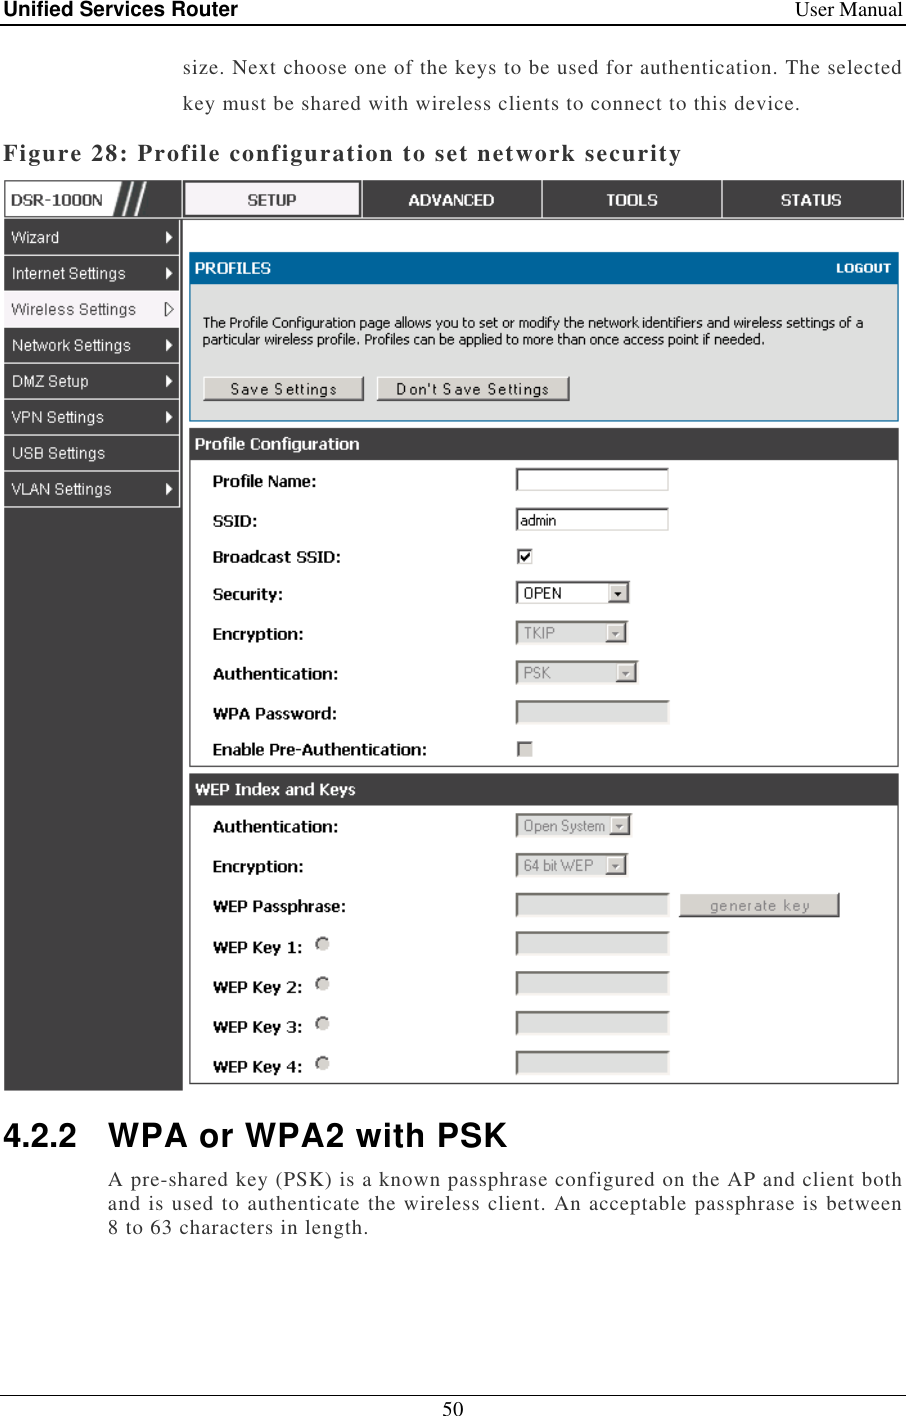 Unified Services Router    User Manual 50  size. Next choose one of the keys to be used for authentication. The selected key must be shared with wireless clients to connect to this device. Figure 28: Profile configuration to set network security  4.2.2  WPA or WPA2 with PSK A pre-shared key (PSK) is a known passphrase configured on the AP and client both and is used to authenticate the wireless client. An acceptable passphrase is between 8 to 63 characters in length.  